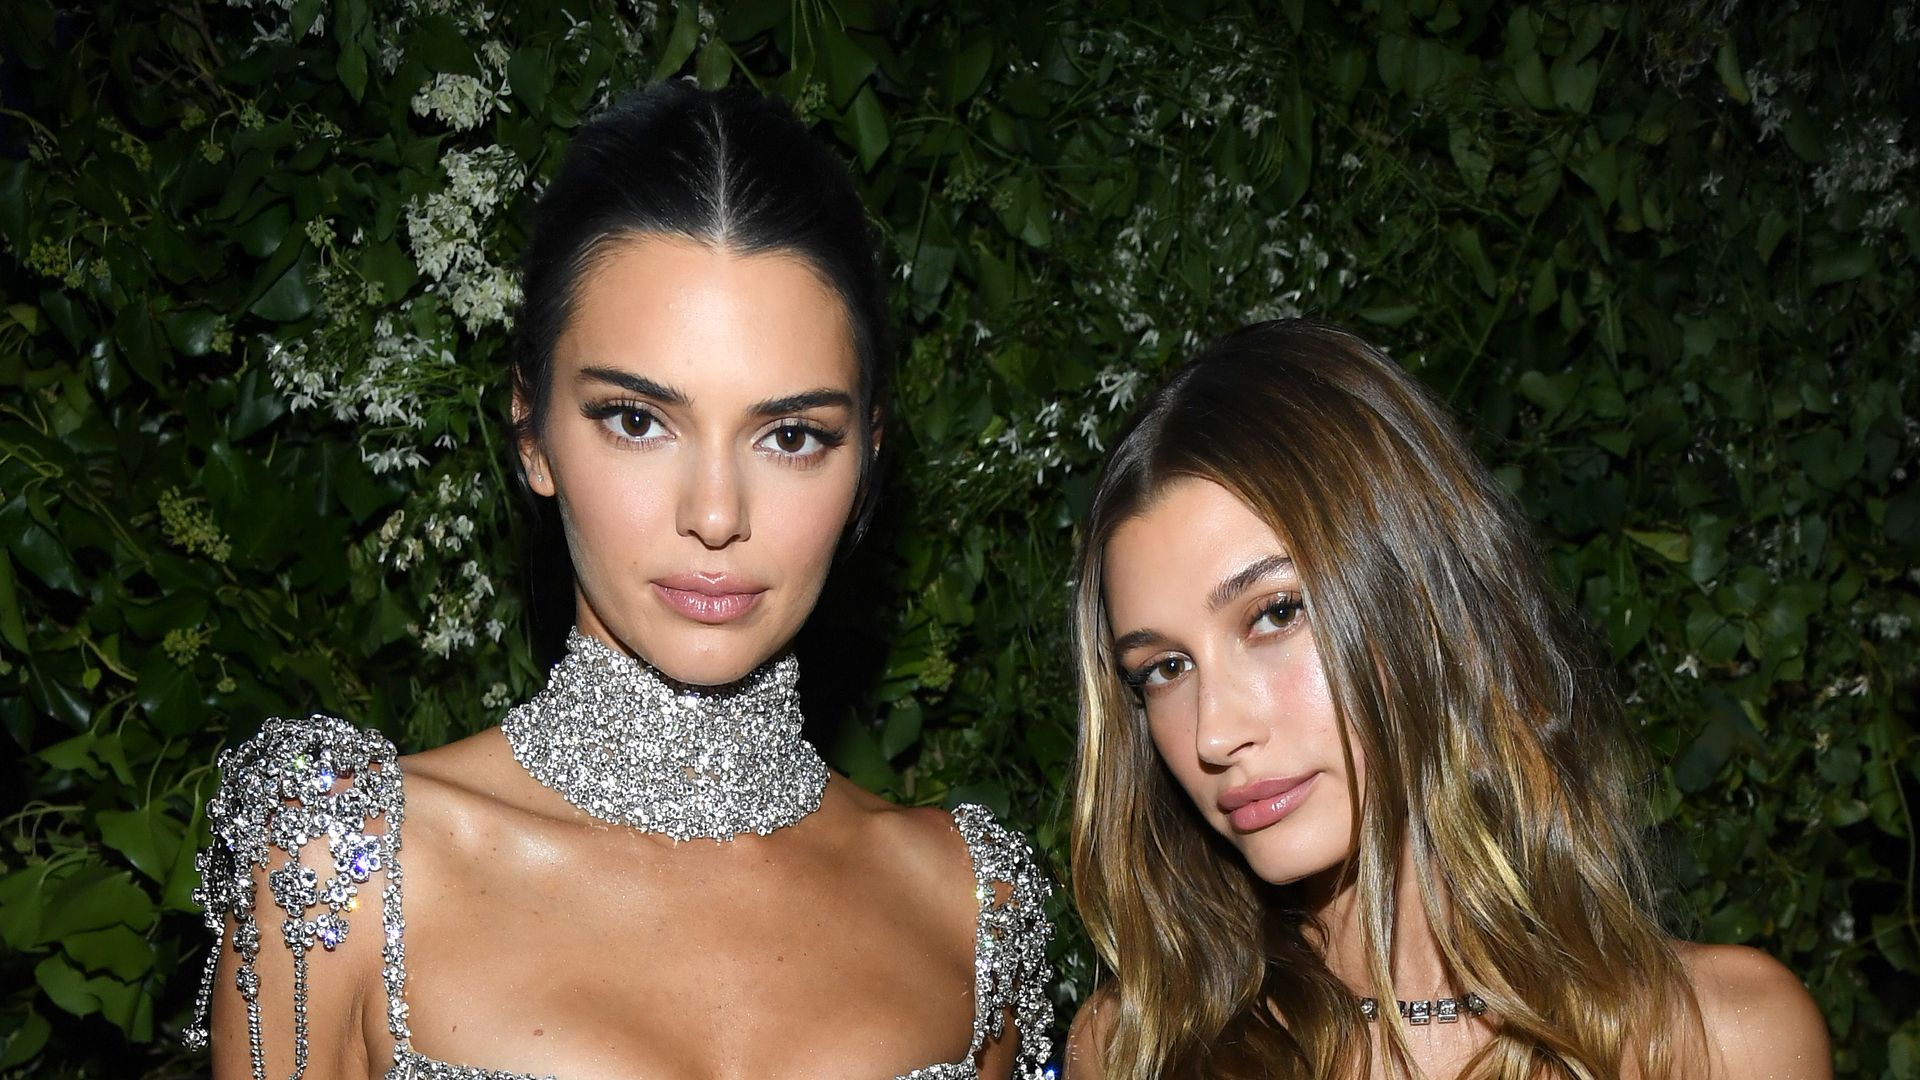 NEW YORK, NEW YORK - SEPTEMBER 13: (EXCLUSIVE COVERAGE) Kendall Jenner and Hailey Bieber attend the The 2021 Met Gala Celebrating In America: A Lexicon Of Fashion at Metropolitan Museum of Art on September 13, 2021 in New York City. (Photo by Kevin Mazur/MG21/Getty Images for The Met Museum/Vogue )